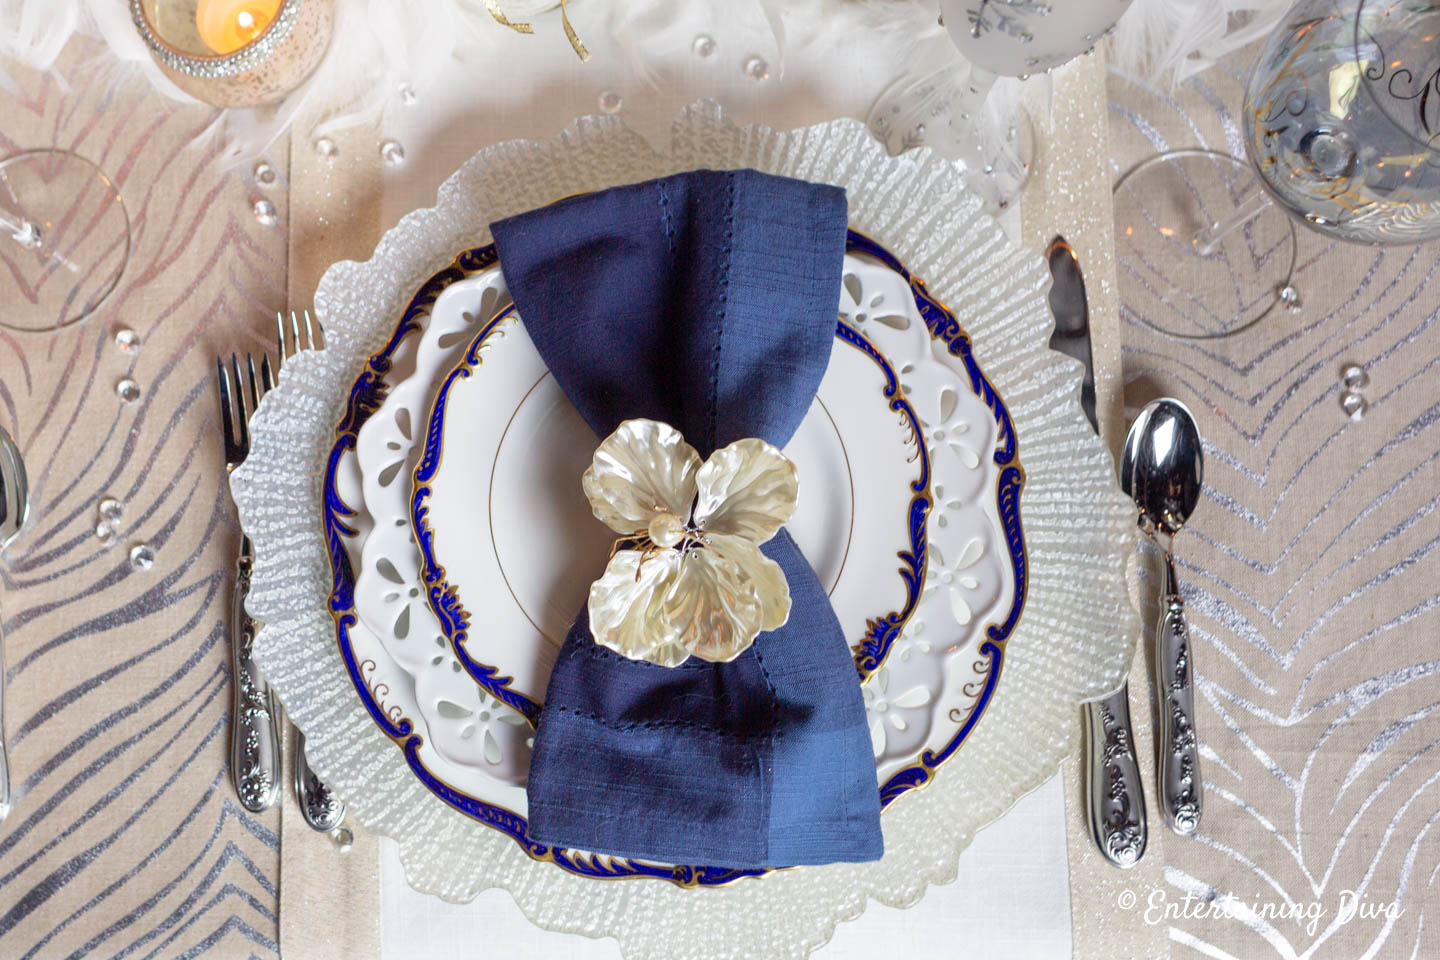 White, blue and gold table setting on winter wonderland tablescape